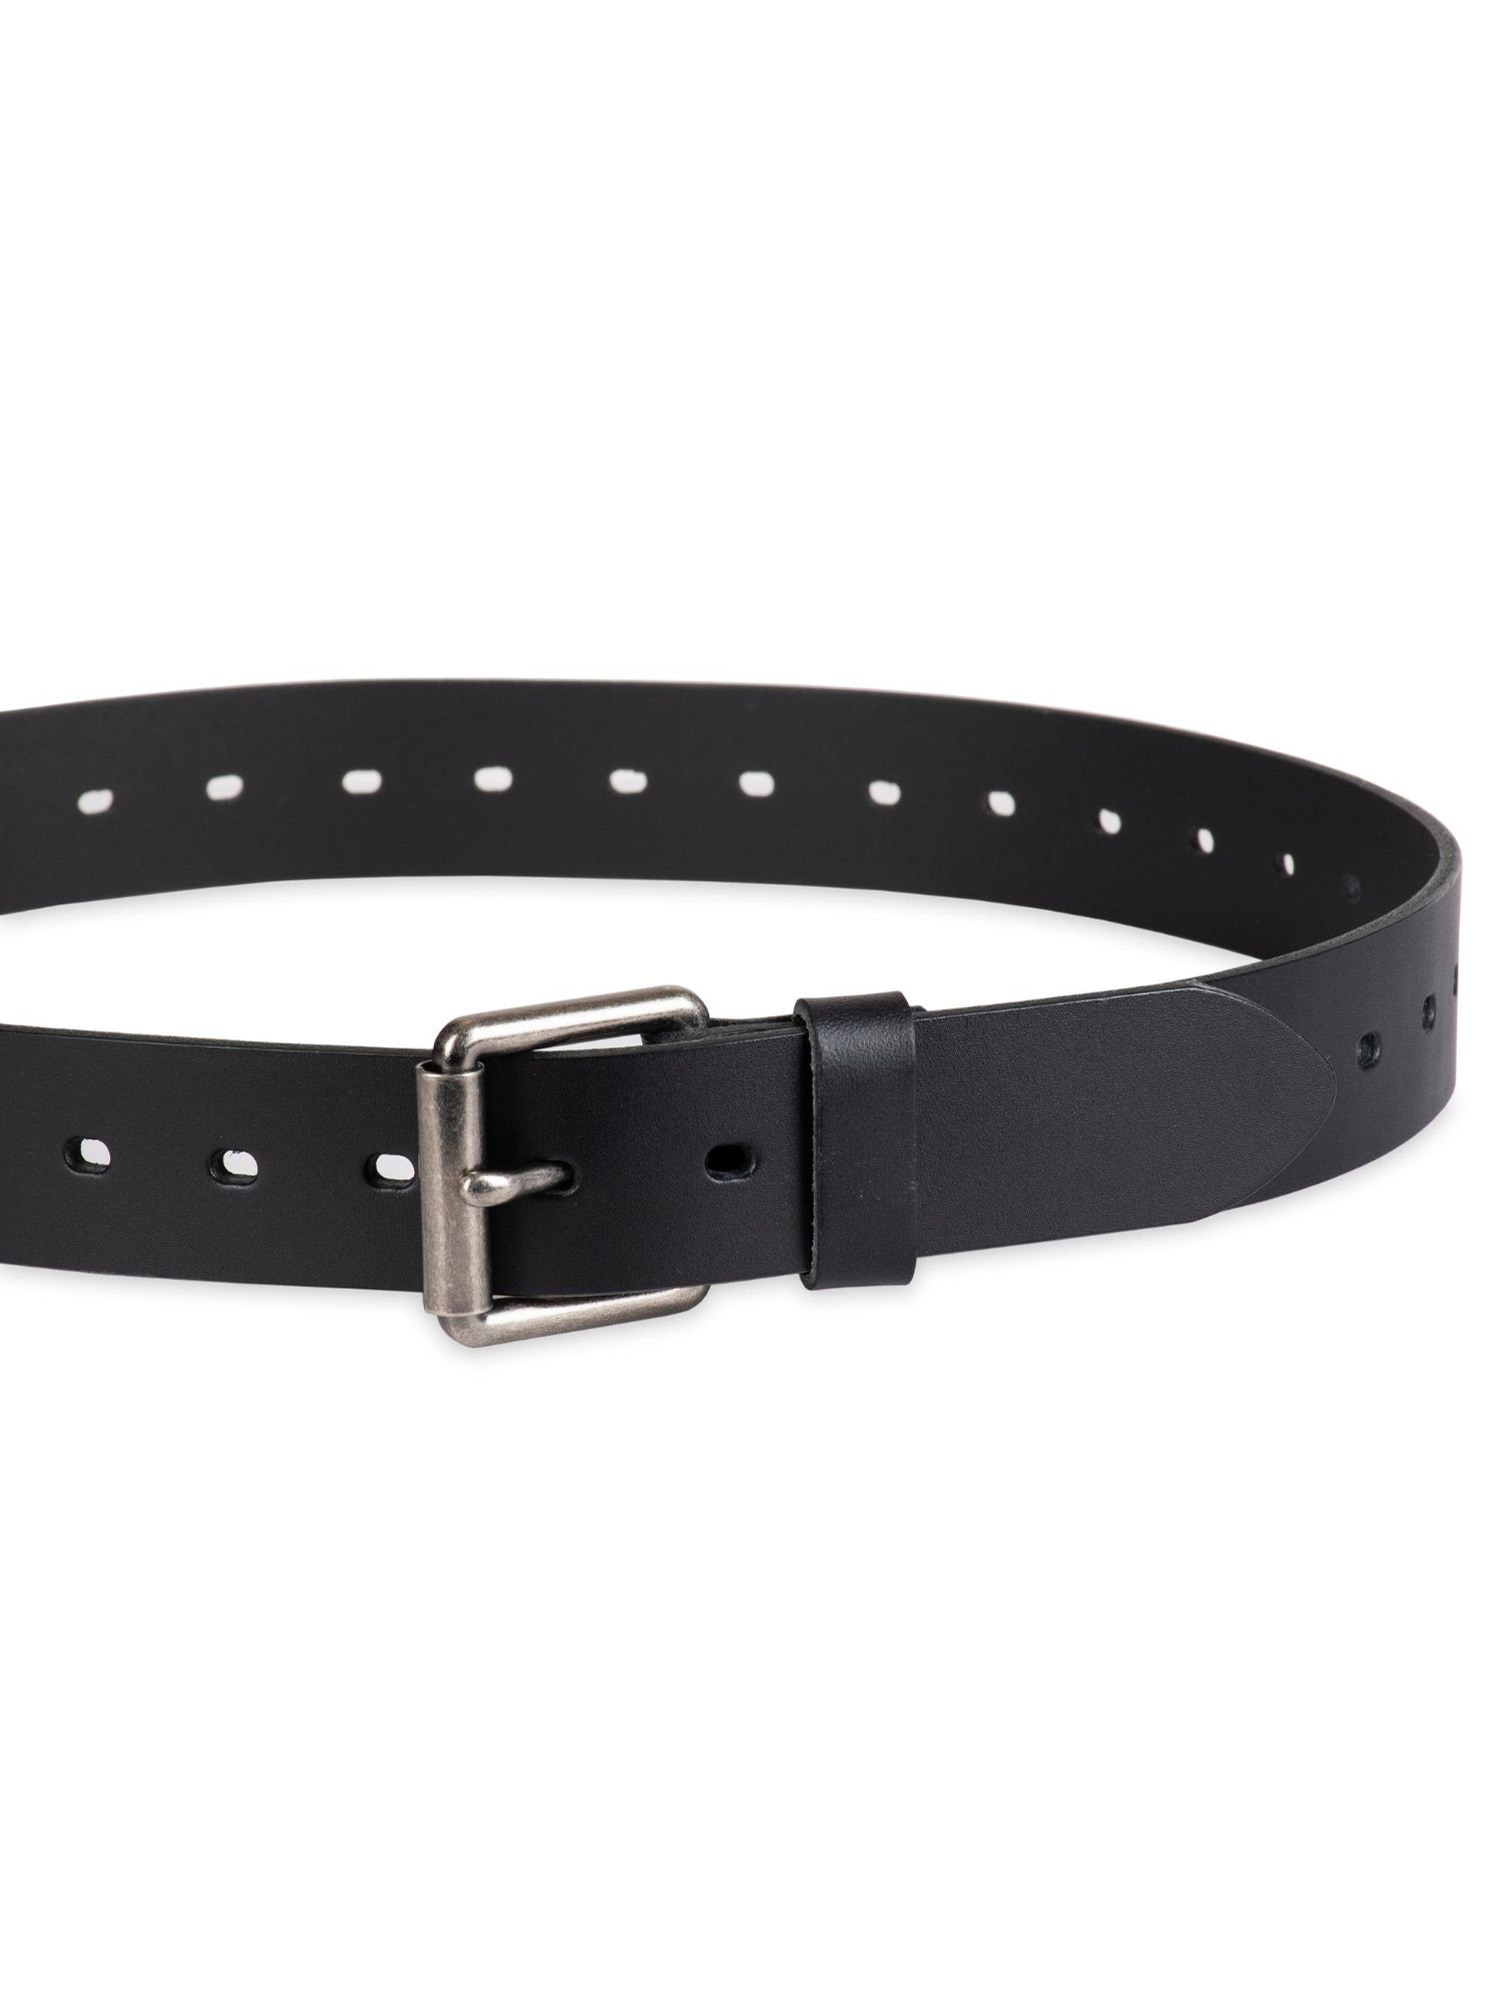 Genuine Dickies Men's Black Fully Adjustable Perforated Leather Belt (Regular and Big & Tall Sizes) - image 2 of 6